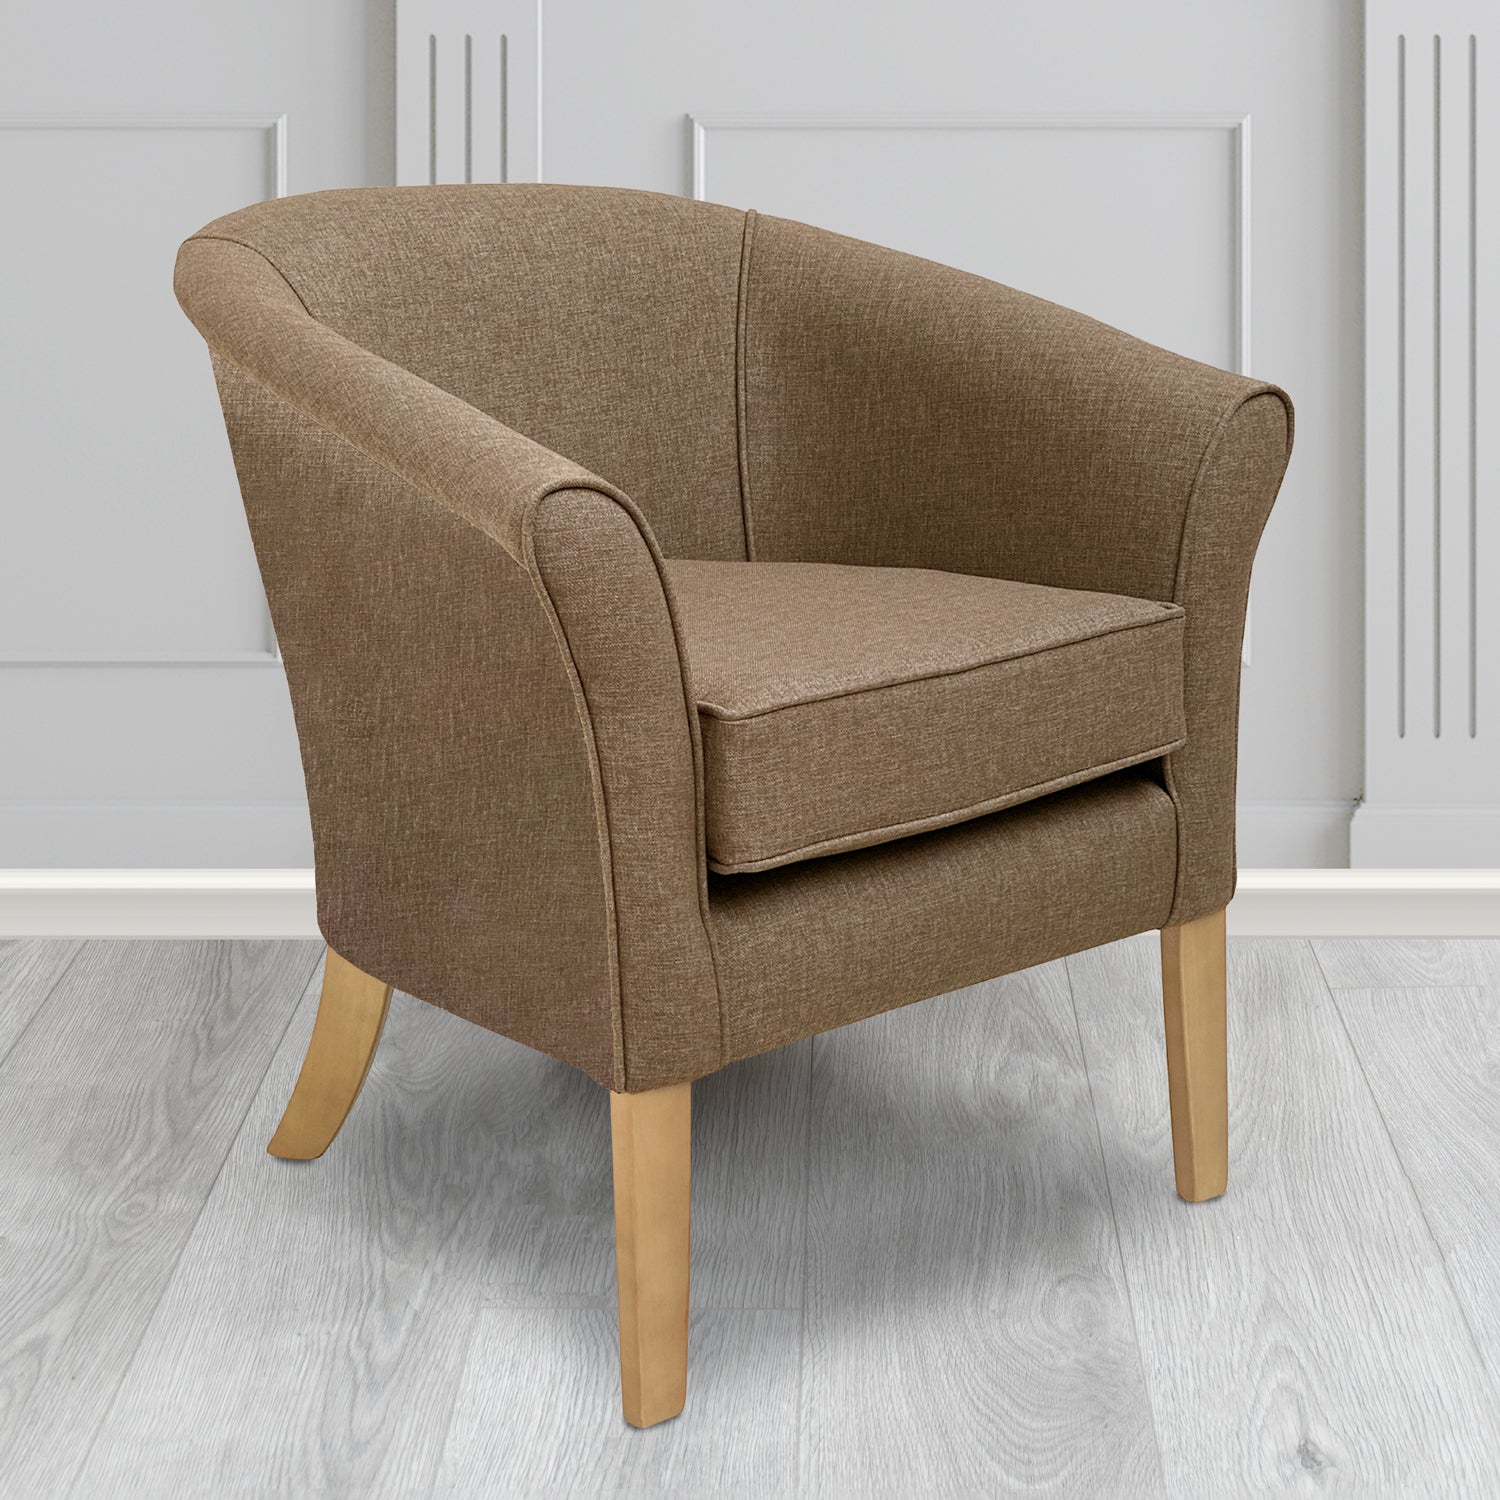 Aspen Tub Chair in Marna 770 Nutmeg Crib 5 Fabric - Antimicrobial, Stain Resistant & Waterproof - The Tub Chair Shop